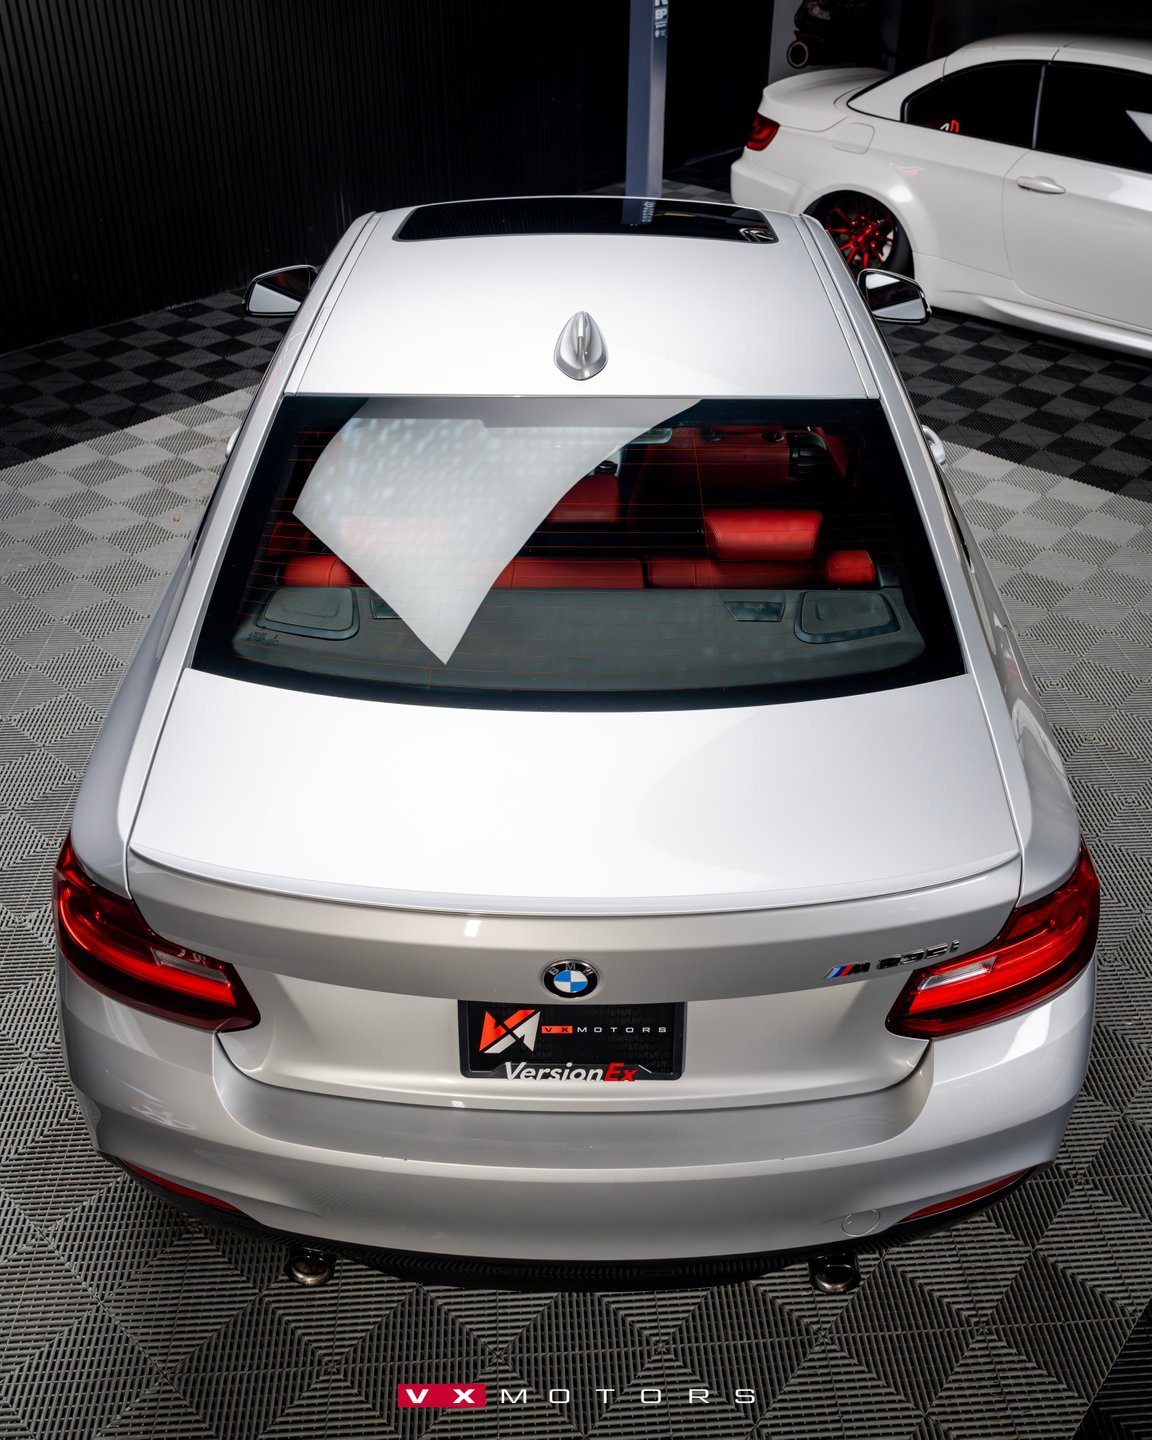 For Sale 2014 BMW 2 Series